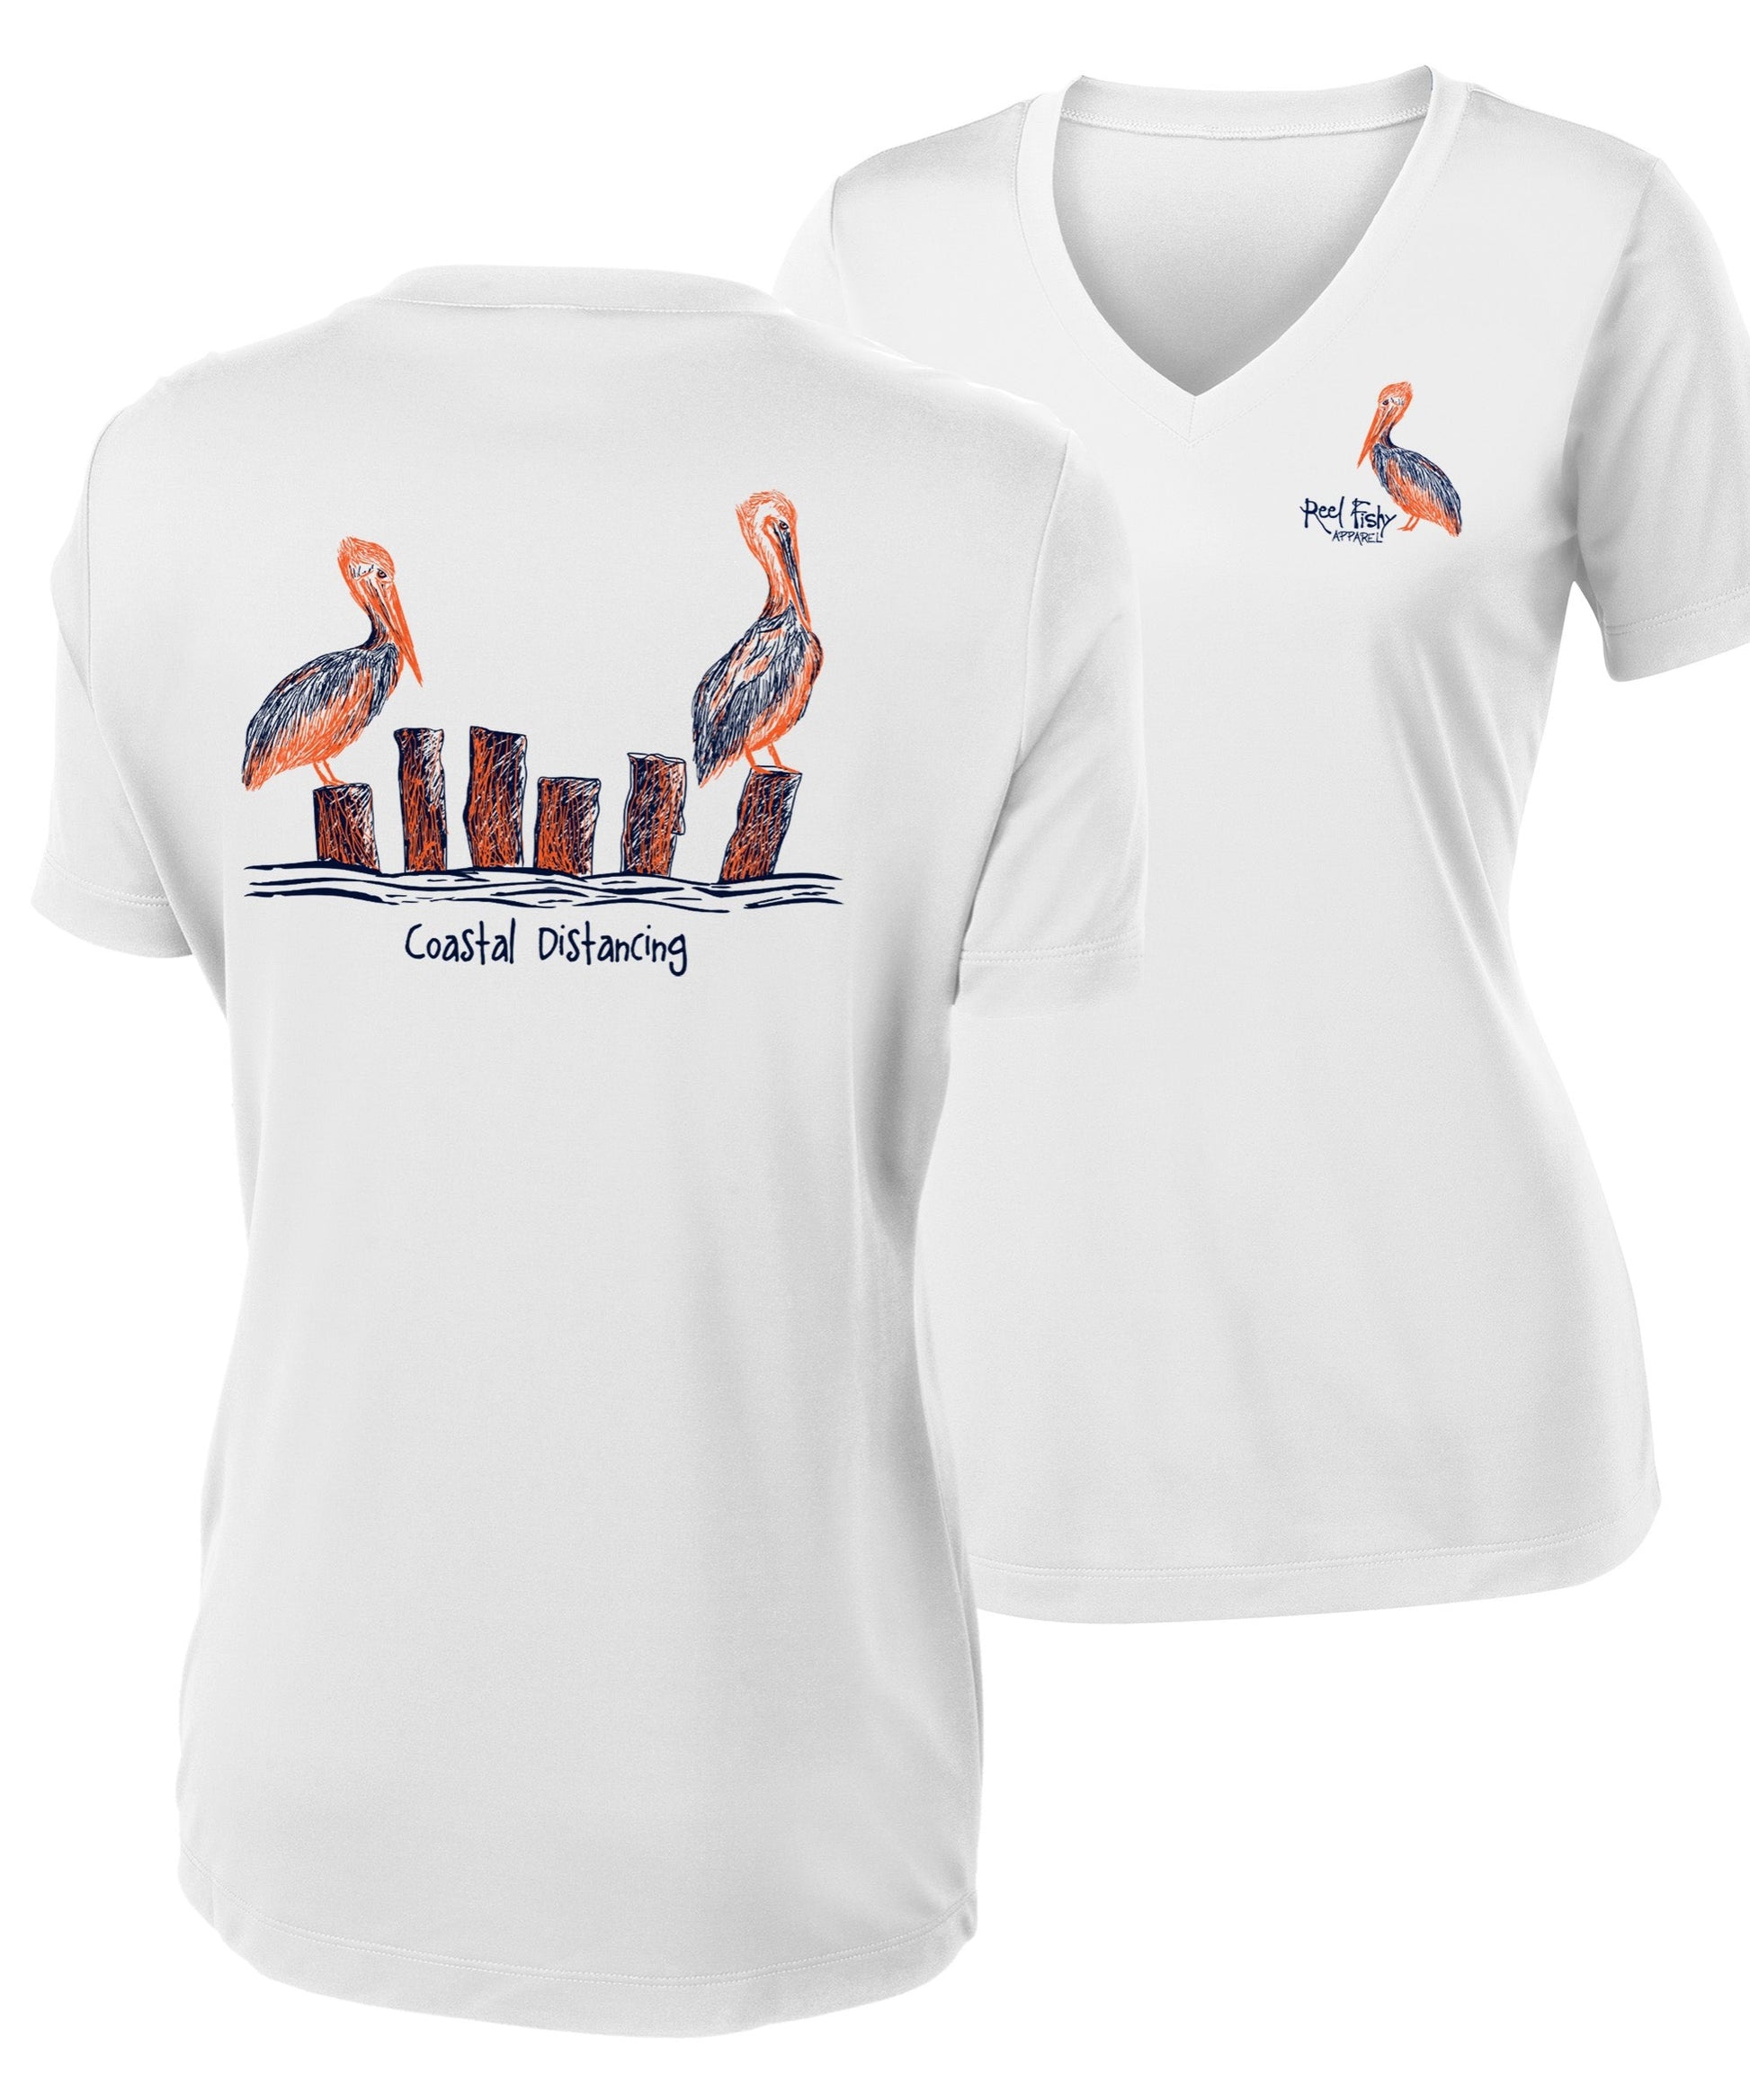 Ladies Pelicans Costal Distancing Performance V-neck White Short Sleeve